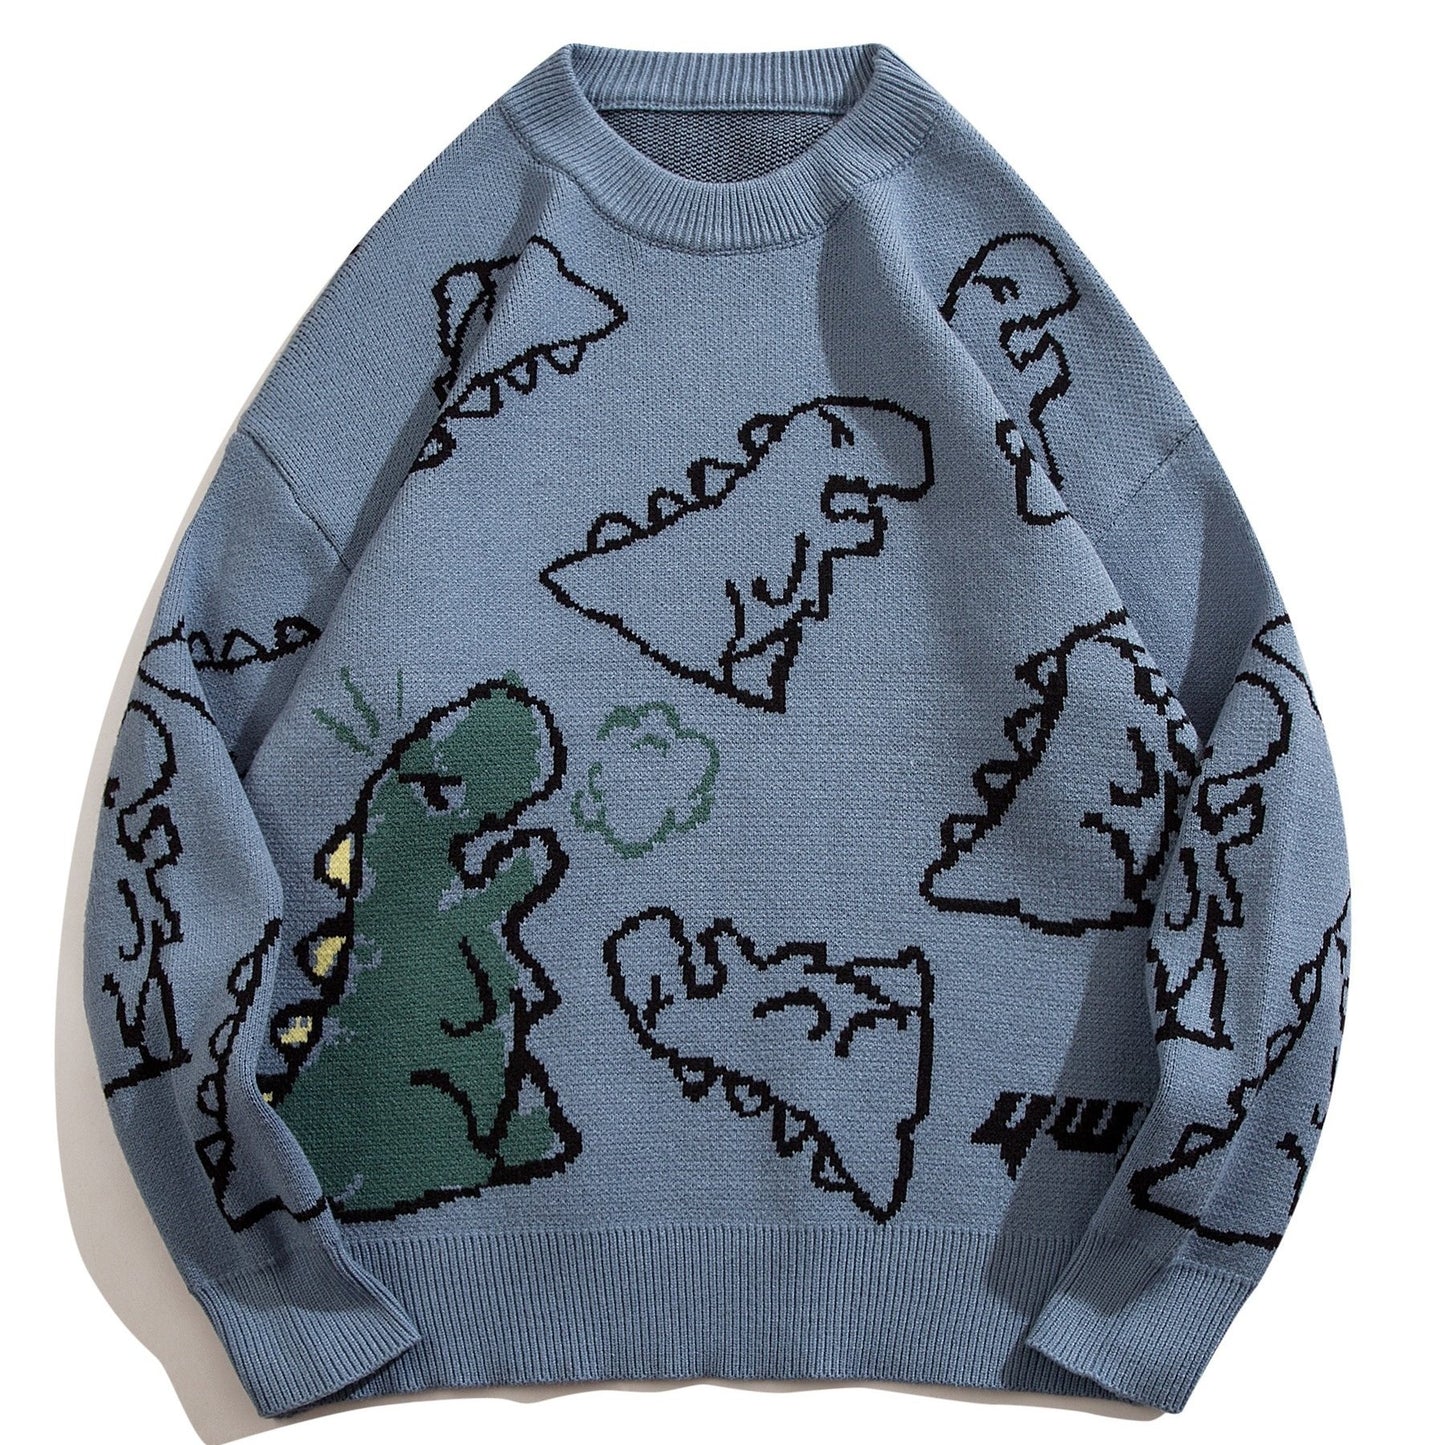 Foruwish - Cute Cartoon Dinosaur Pattern Knitted Sweater, Men's Casual Warm Slightly Stretch Round Neck Pullover Sweater For Fall Winter